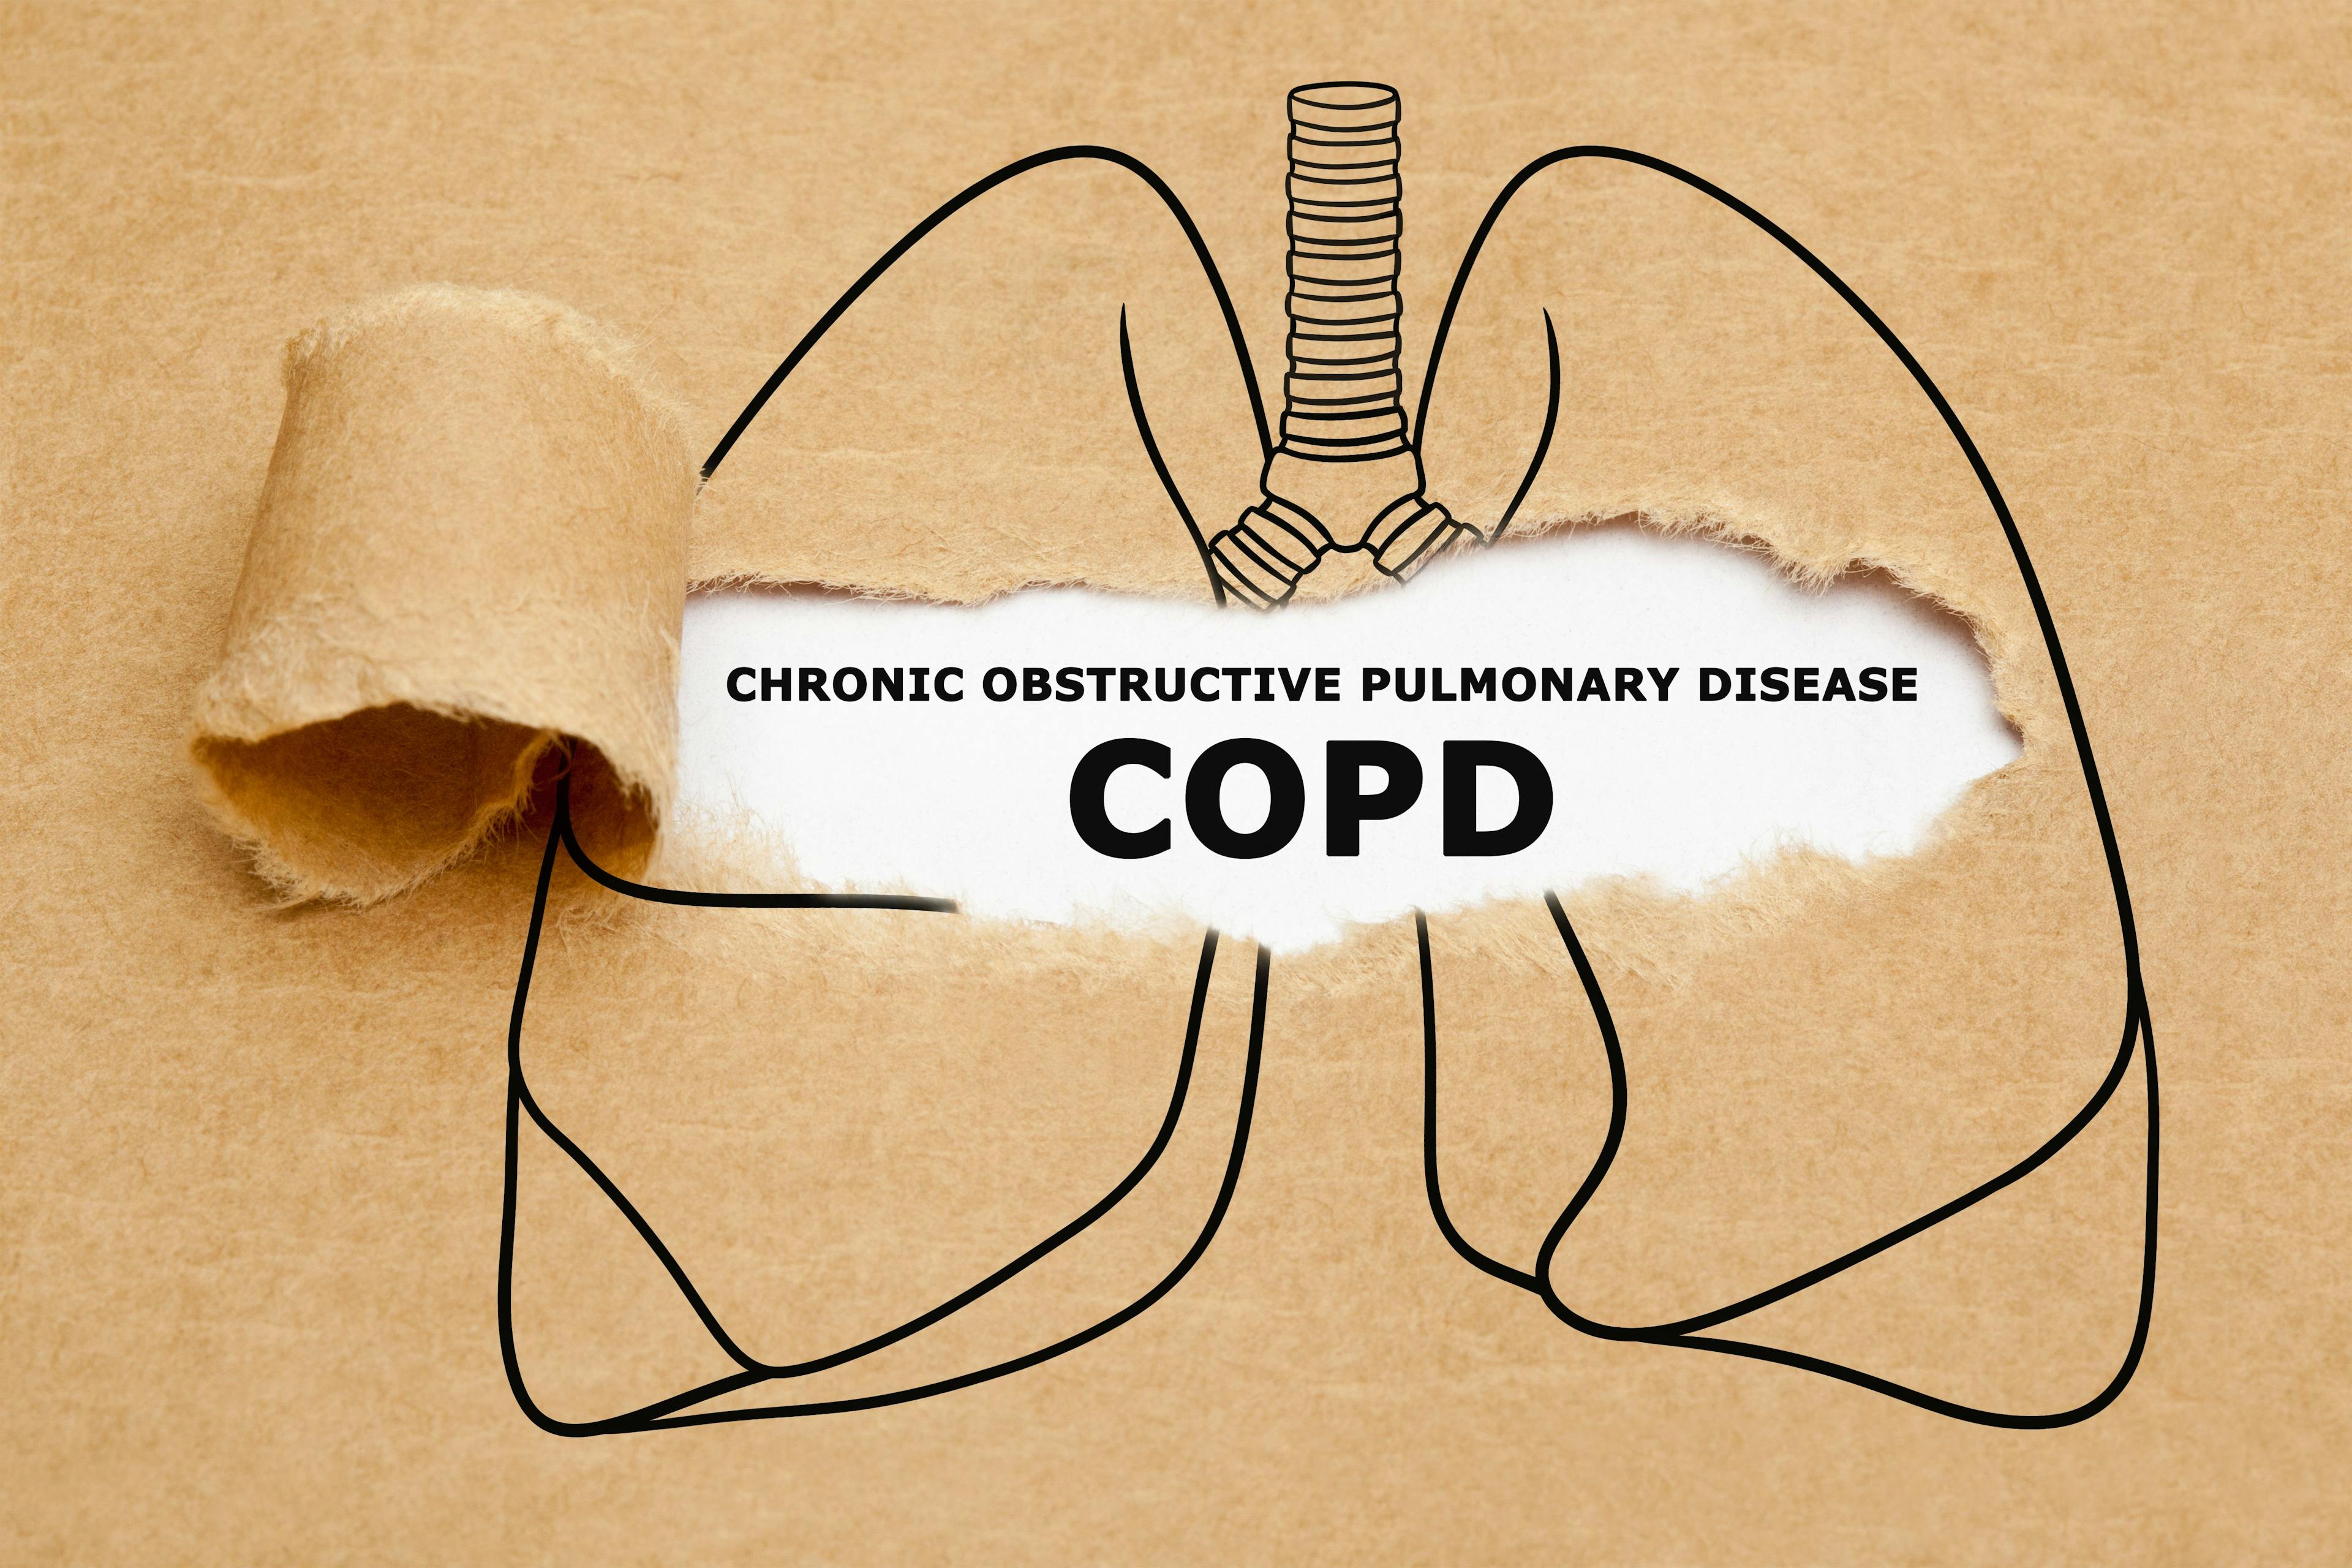 Effects of Pharmacological, Nonpharmacological Interventions on COPD